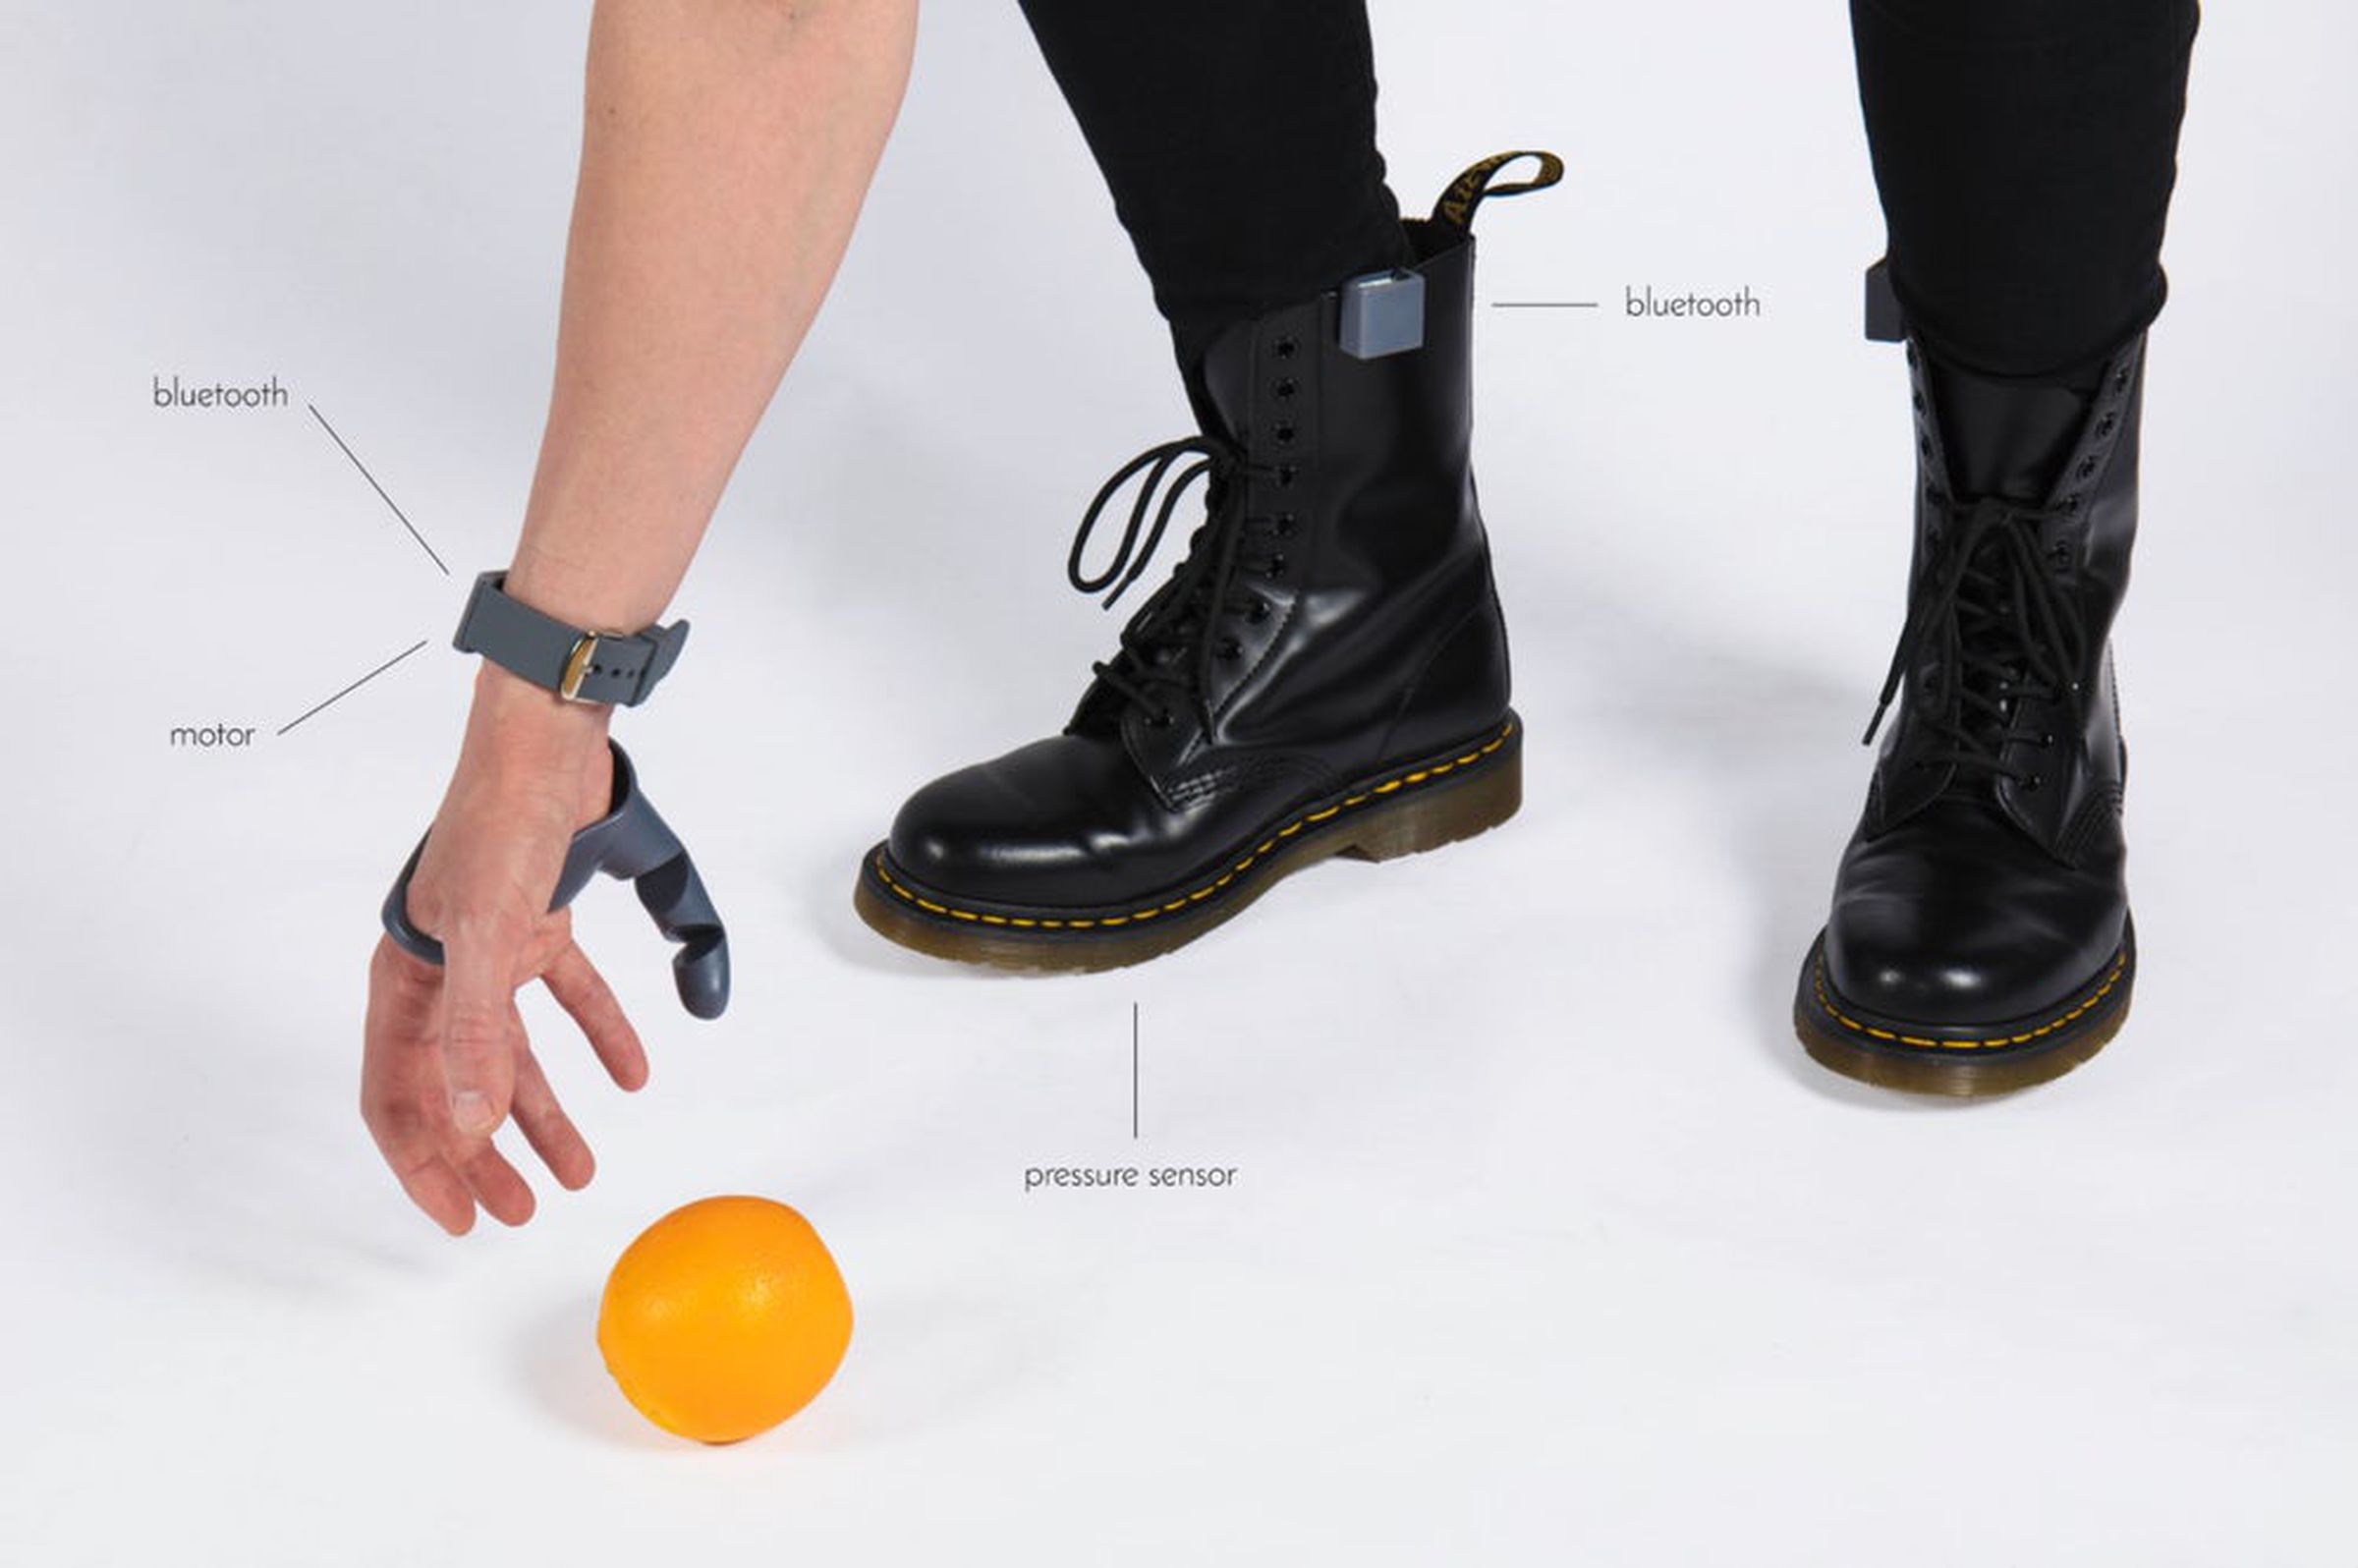 Sensors worn under the feet control the thumb’s gripping motion via Bluetooth.